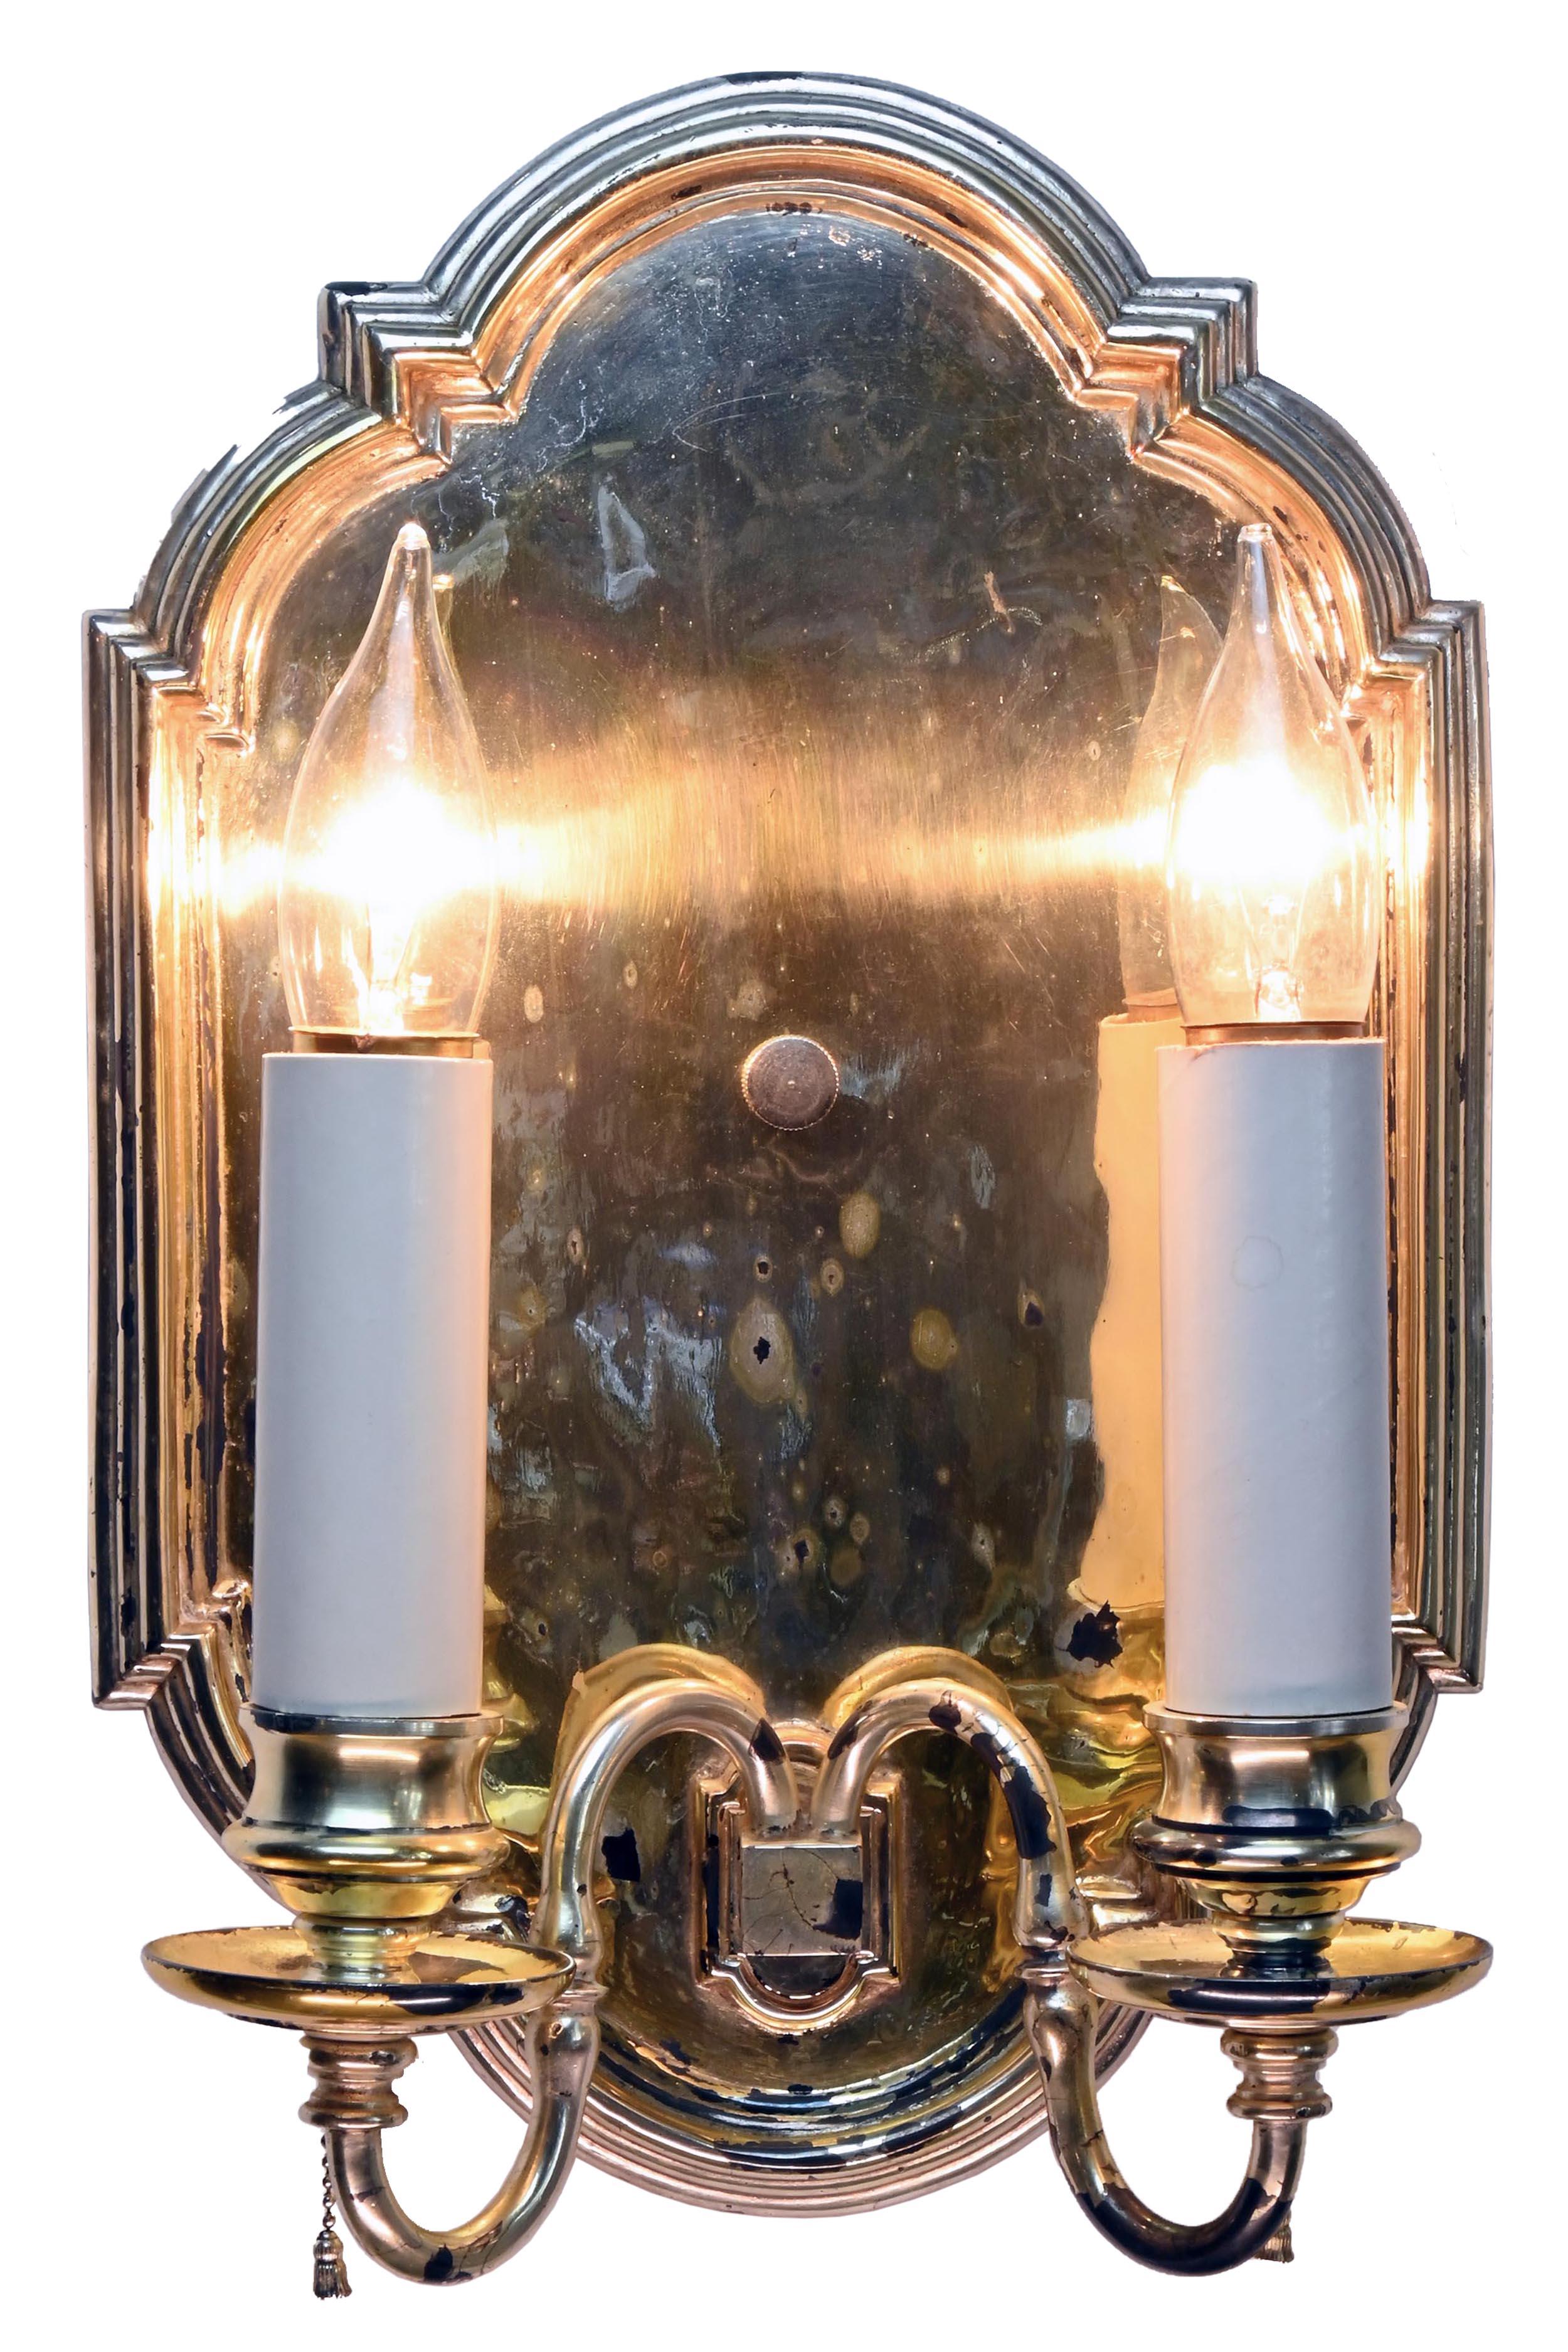 AA# 49687
Circa: 1940’s Historic Charles Bell Lake Minnetonka home 
Condition: Age consistent
Material: Silver plate over brass
Finish: Original lacquer over silver plate 
Country of origin: USA
Illumination: Two Edison base